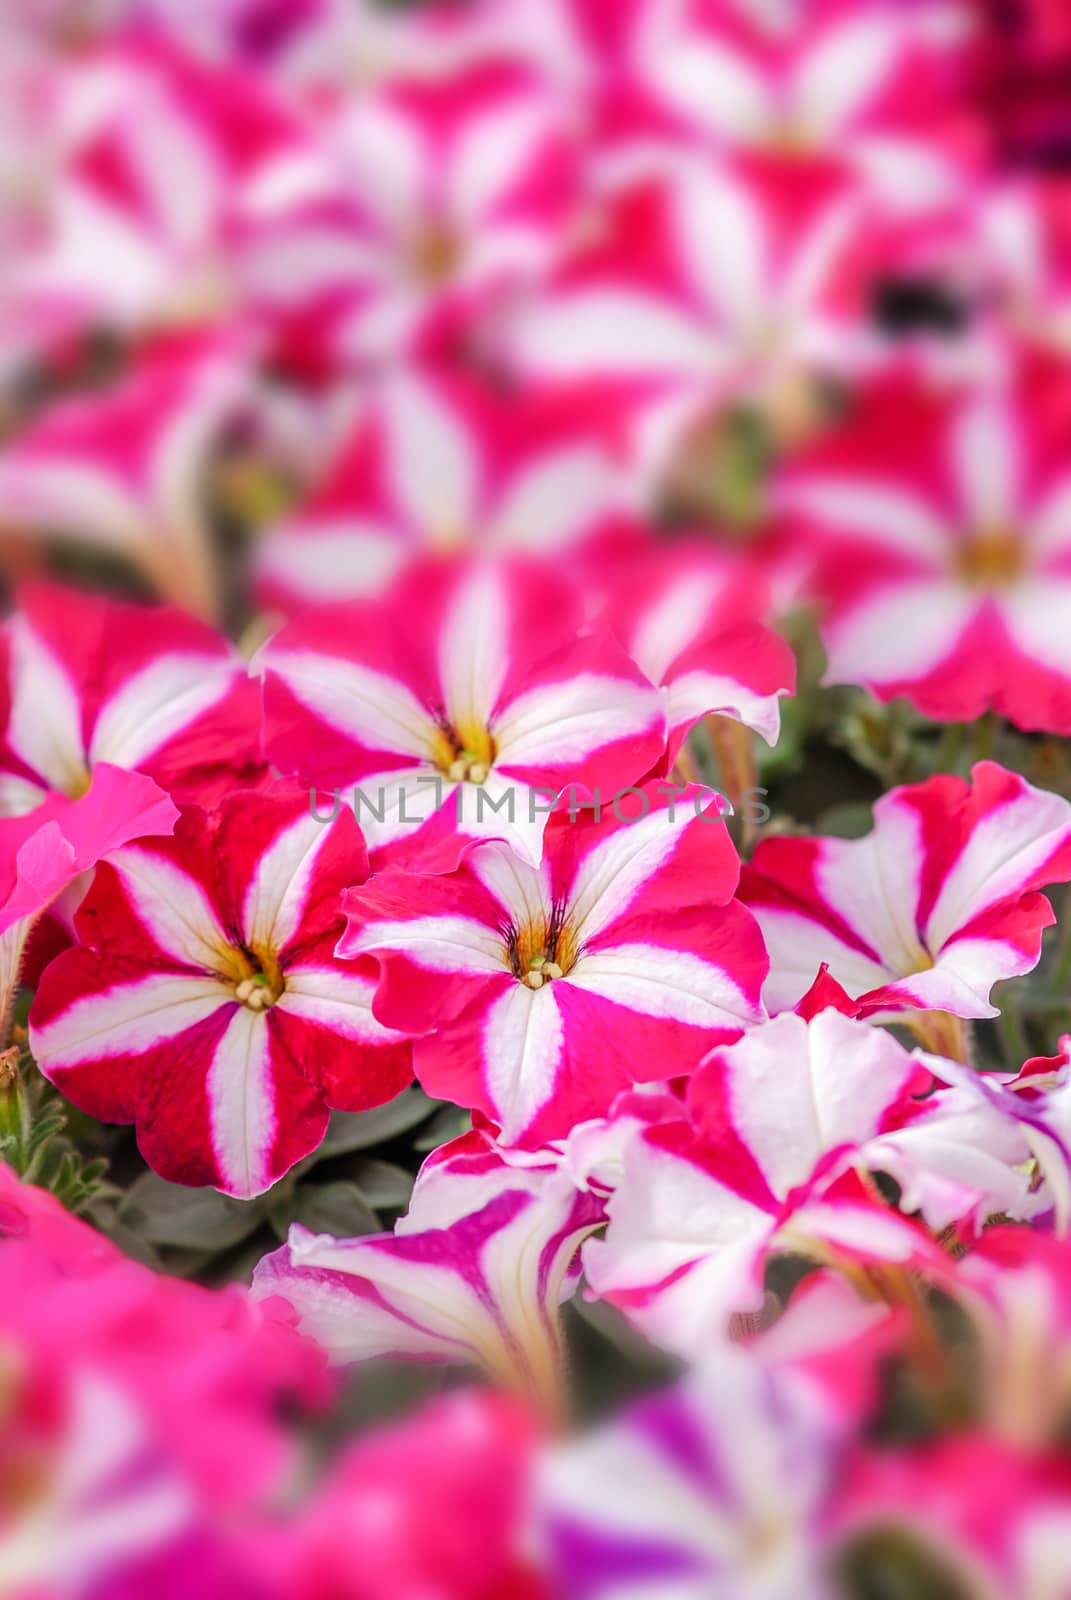 Colorful petunia flowers by yuiyuize